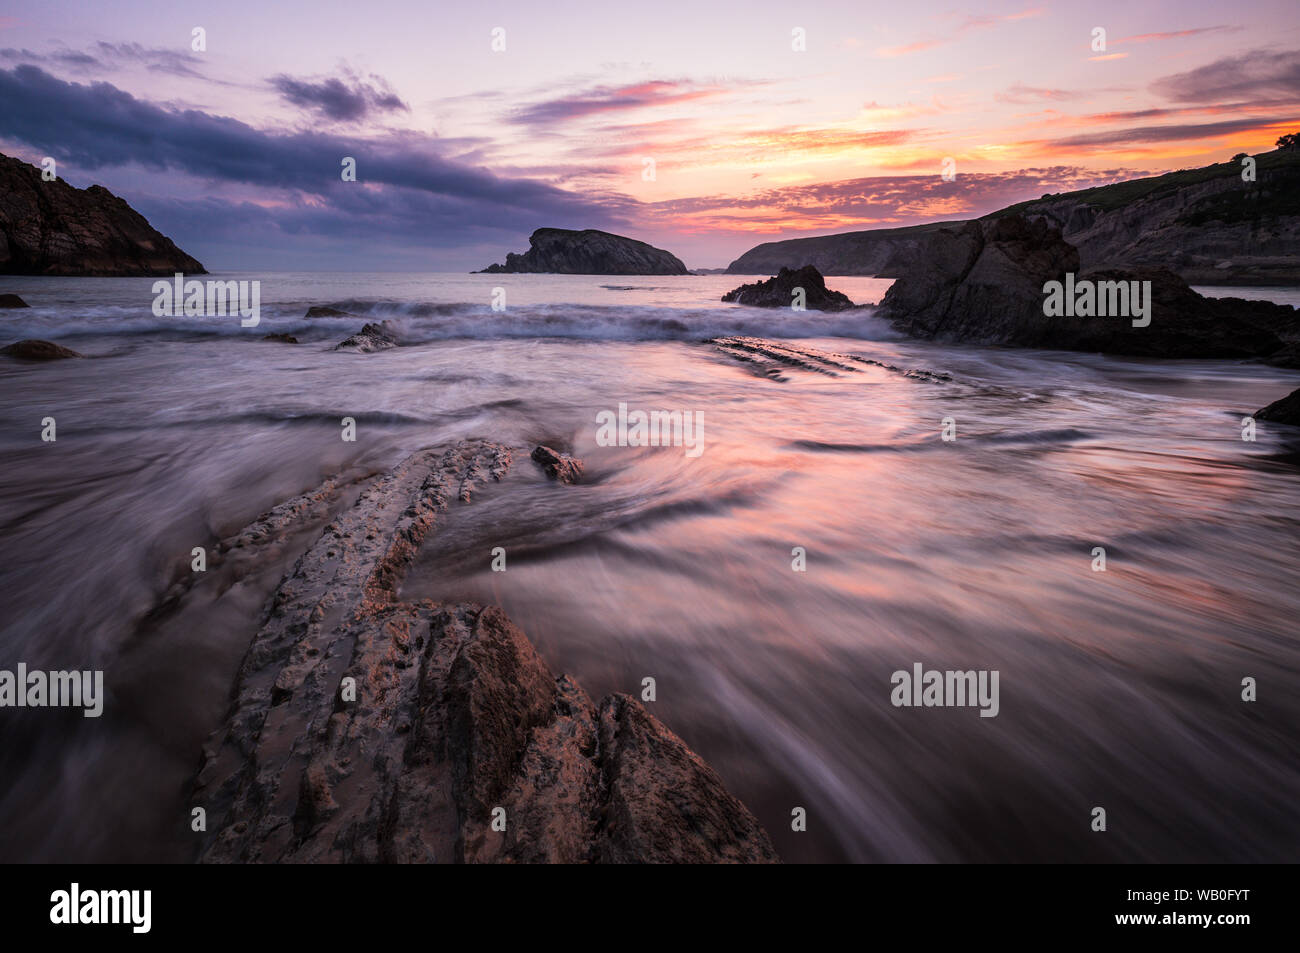 Colorful cloudy Sunrise at the beach of playa de la arnia with dynamic waves and bizarre rocks, Liencres, Northern Spain Stock Photo